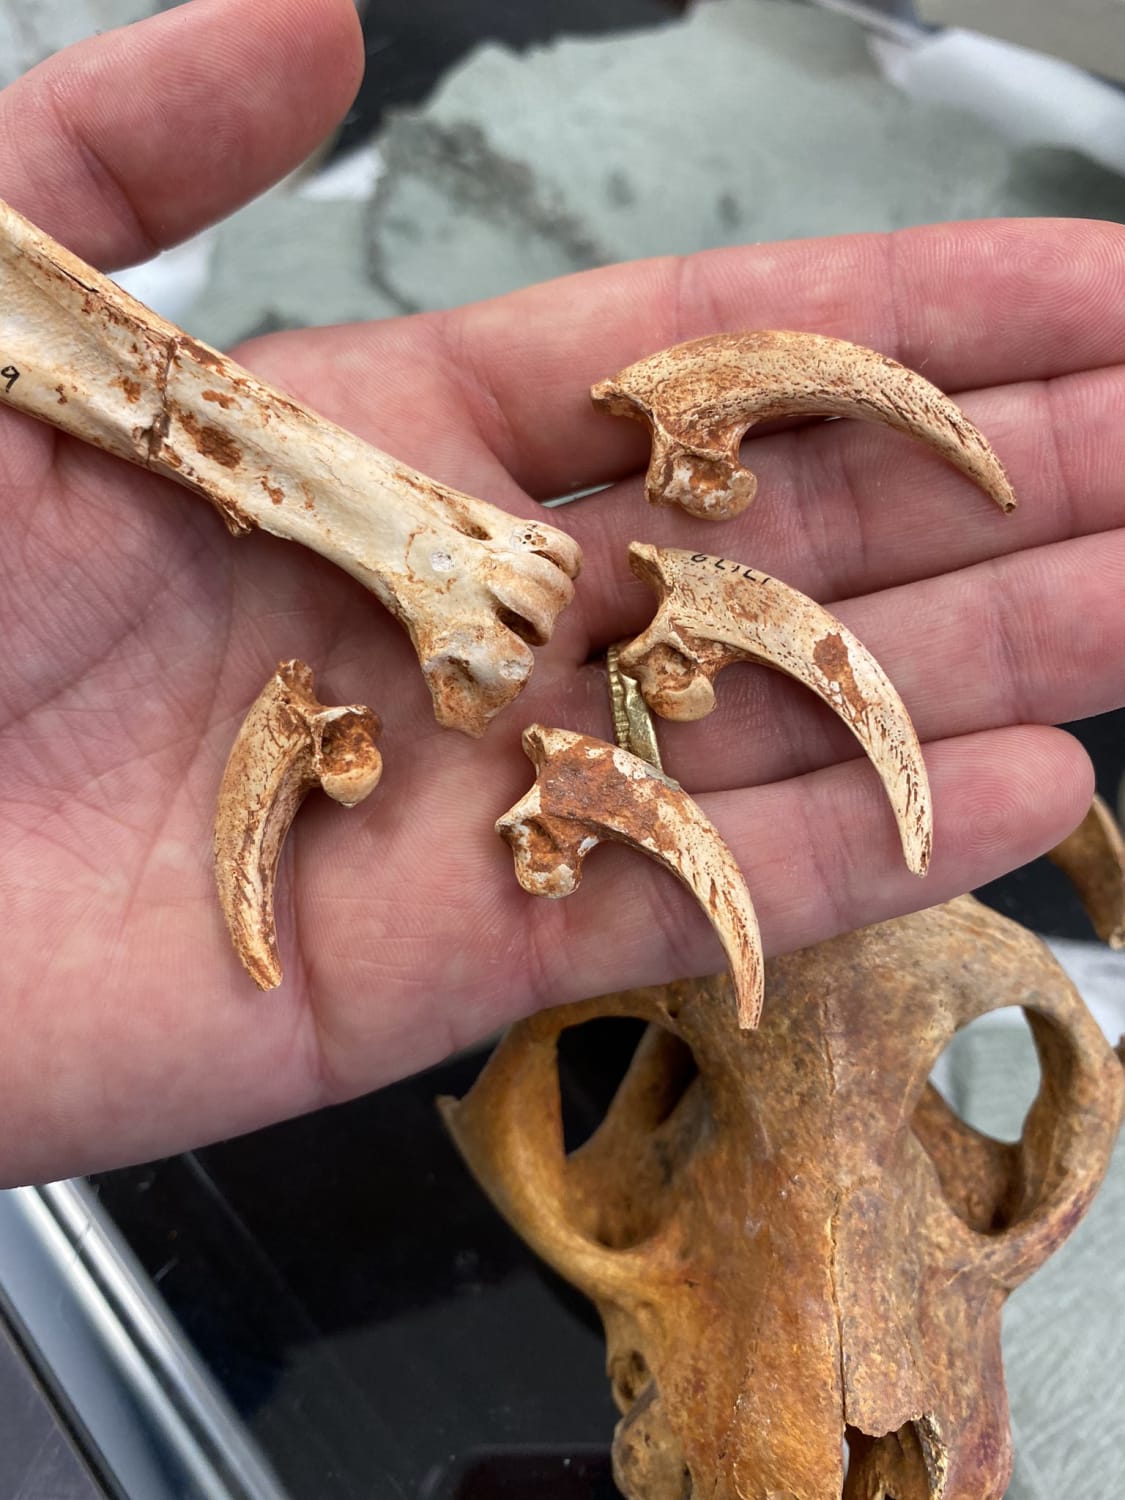 Talons of the extinct Malagasy Crowned Eagle that terrorized lemurs 5500 years ago. Today's lemurs still exhibit raptor avoidance behavior, even though the surviving raptors are too small to hunt adults.